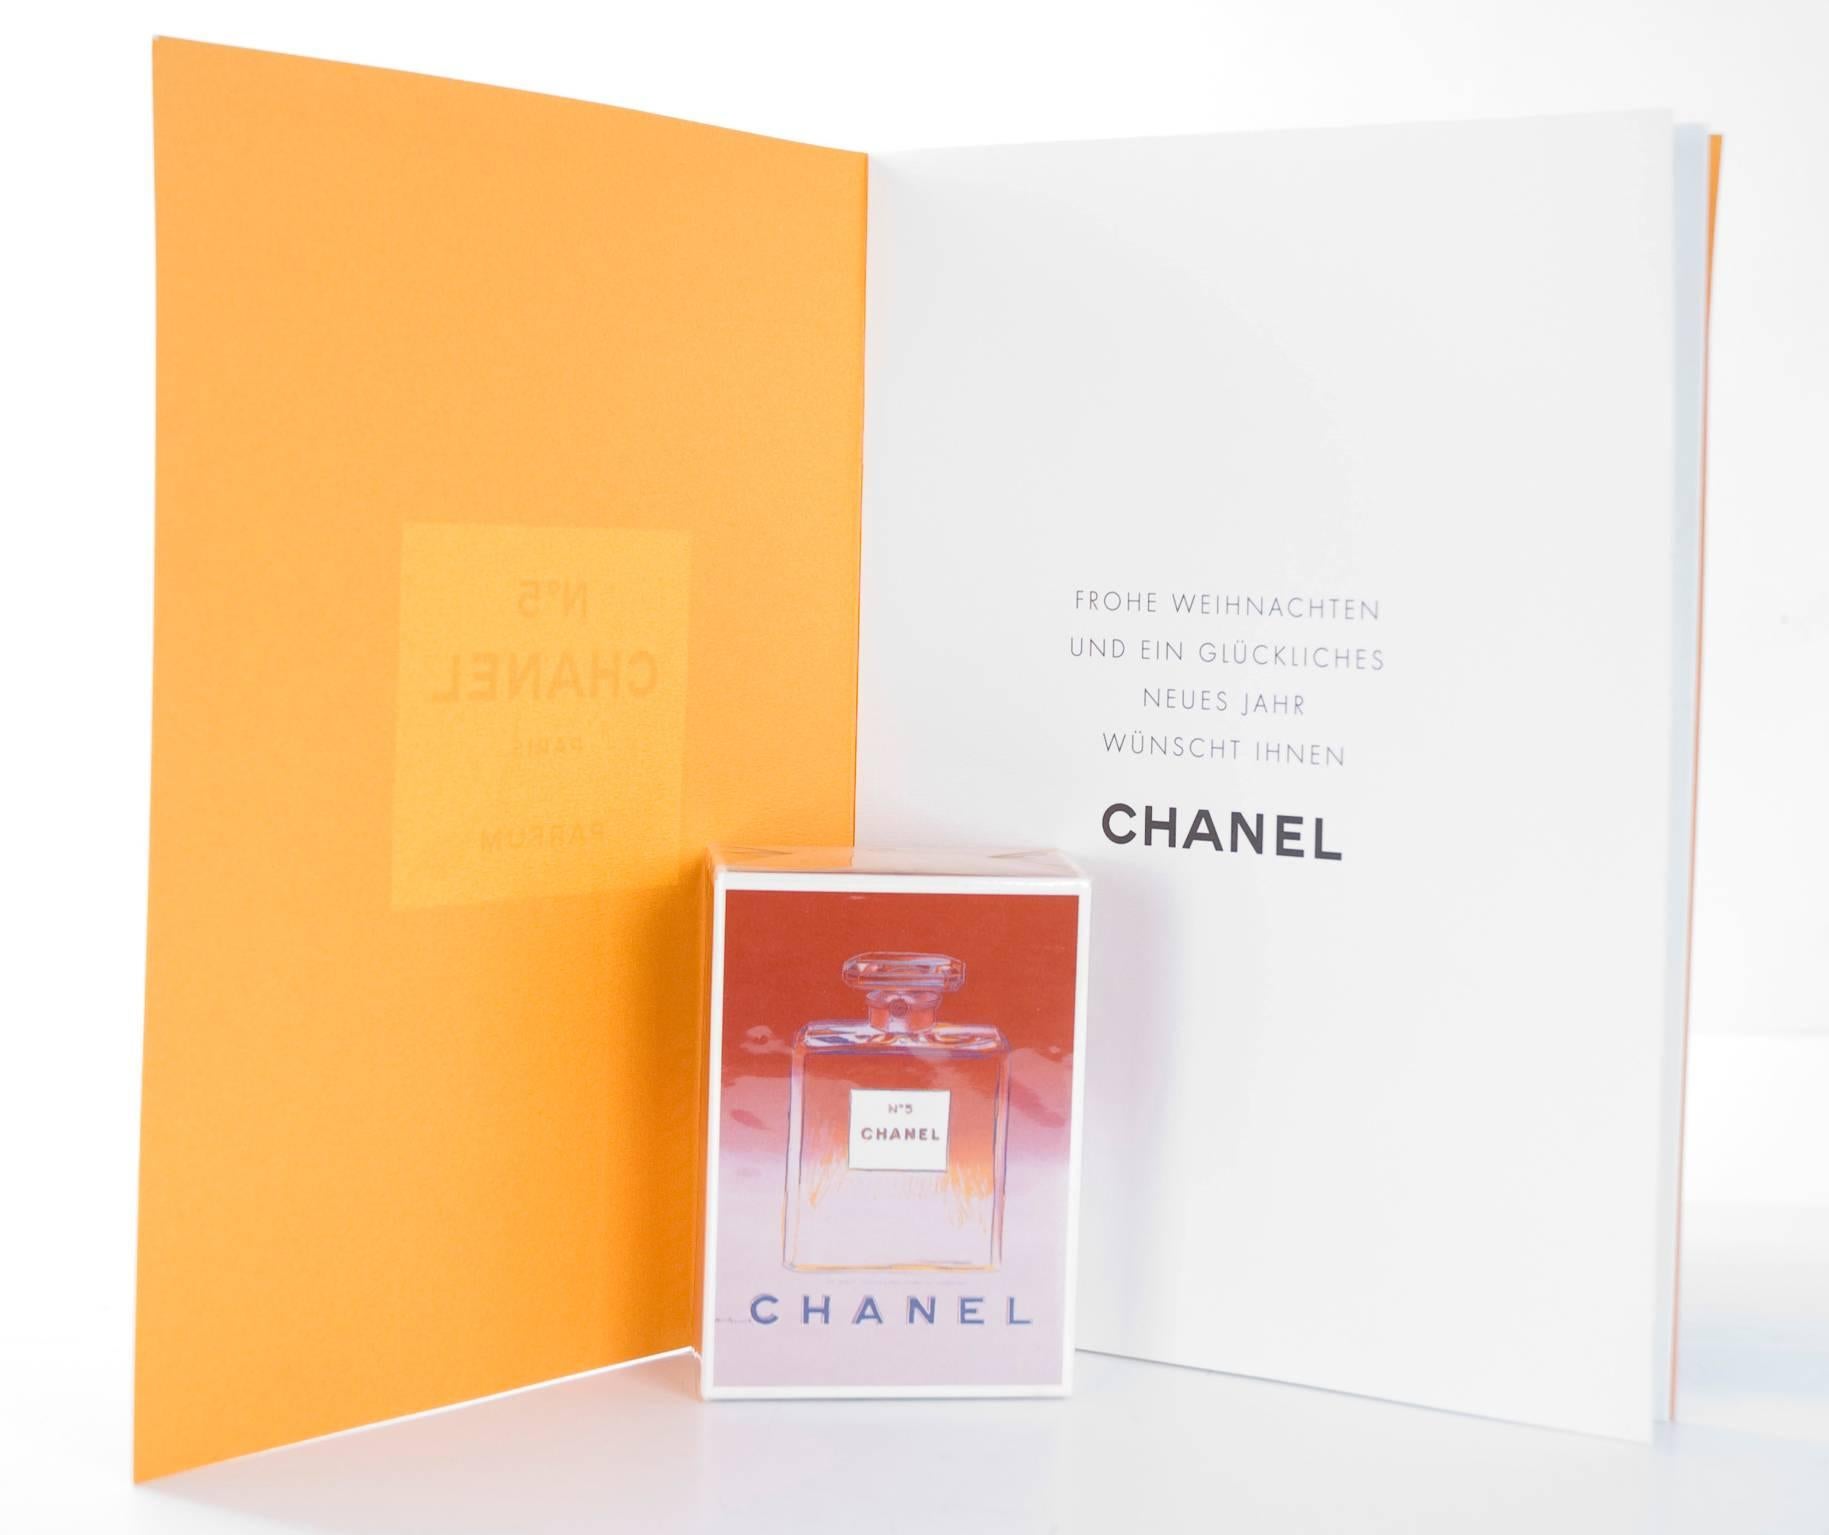 1997 Andy Warhol Chanel No 5 and Booklet with Poster In New Condition For Sale In Hamburg, Deutschland